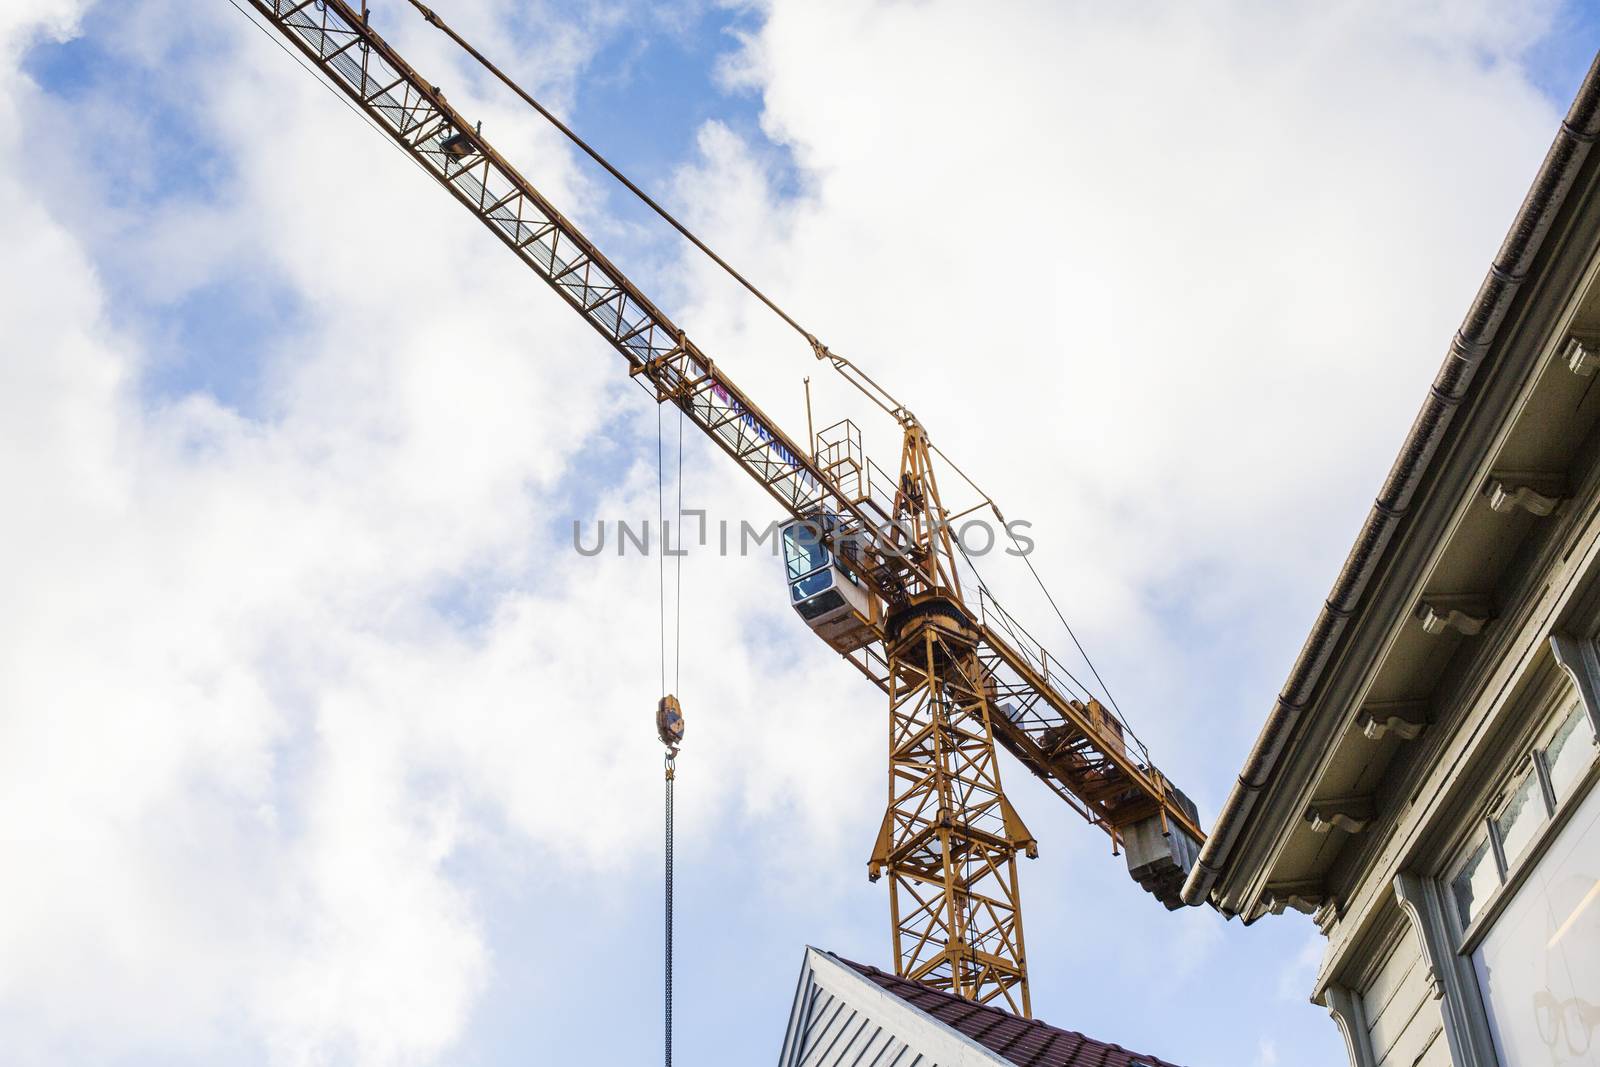 A Tower Crane Overlooking Urban Redevelopment Old Town Stavanger Norway against a Cloudy Sky